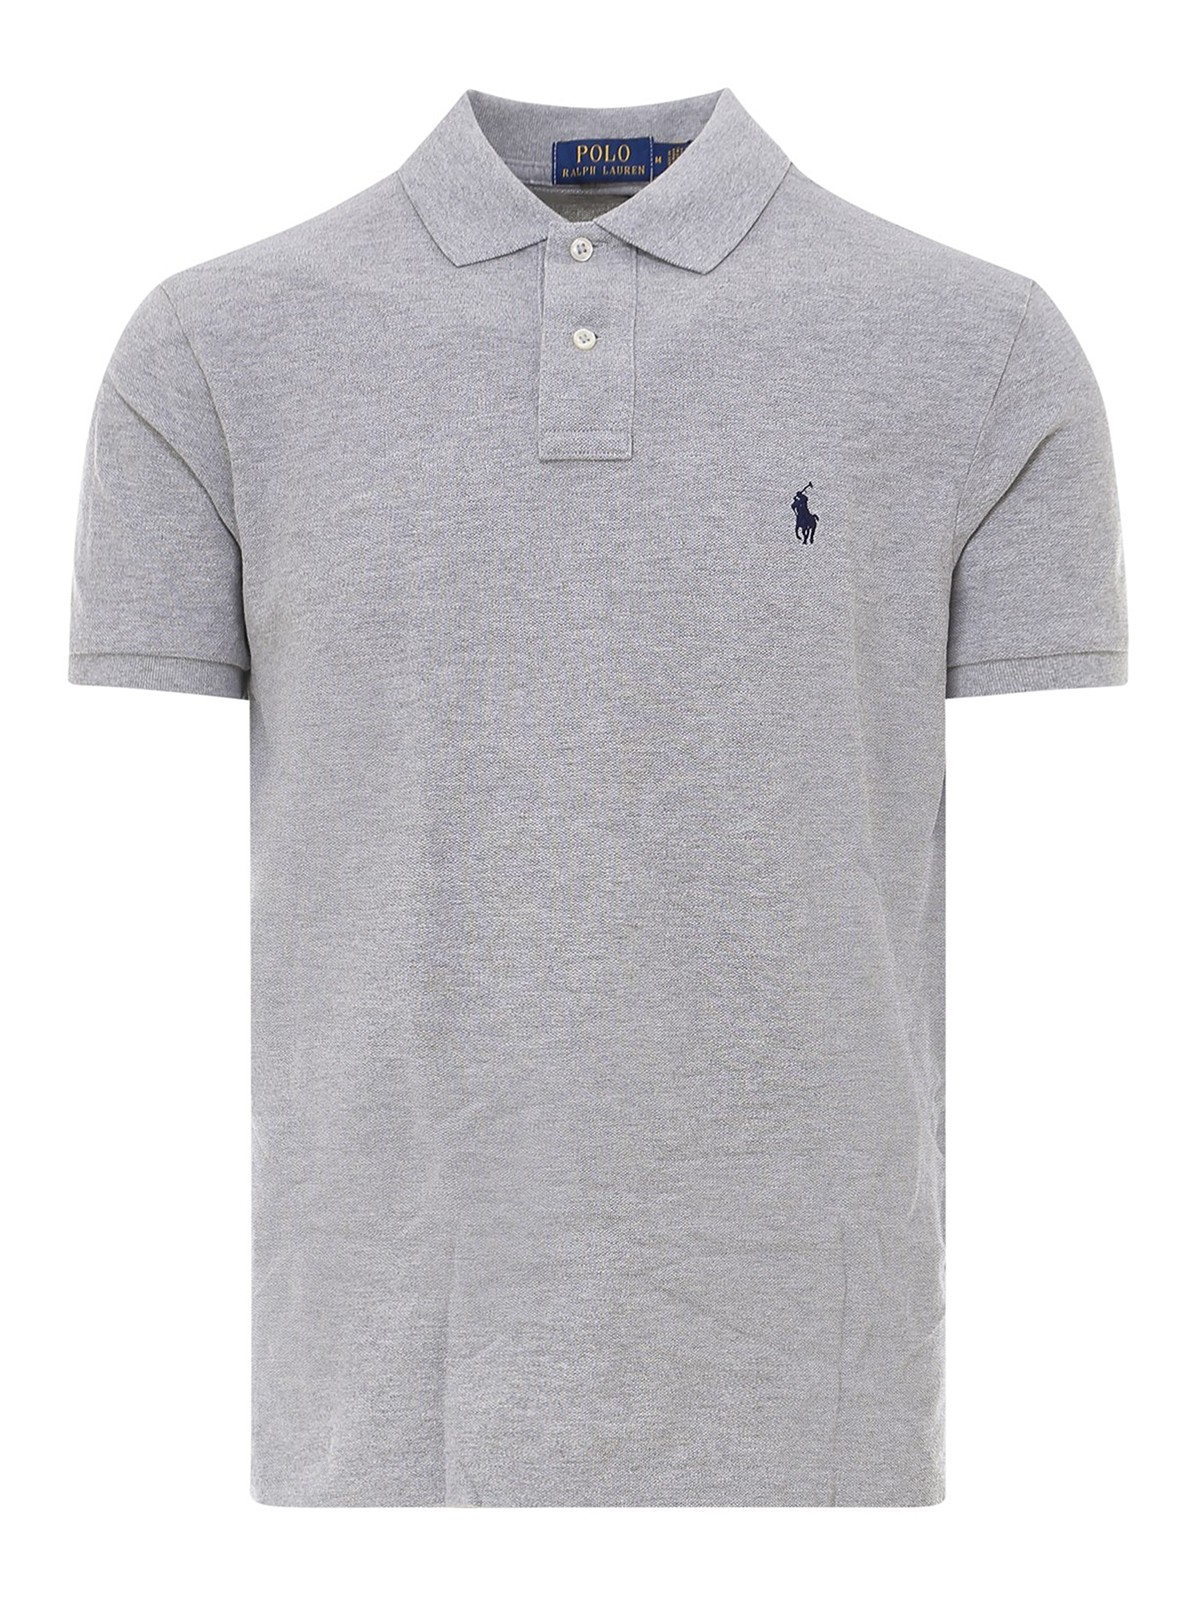 Polo Ralph Lauren Embroidered Cotton Polo Shirt In Grey